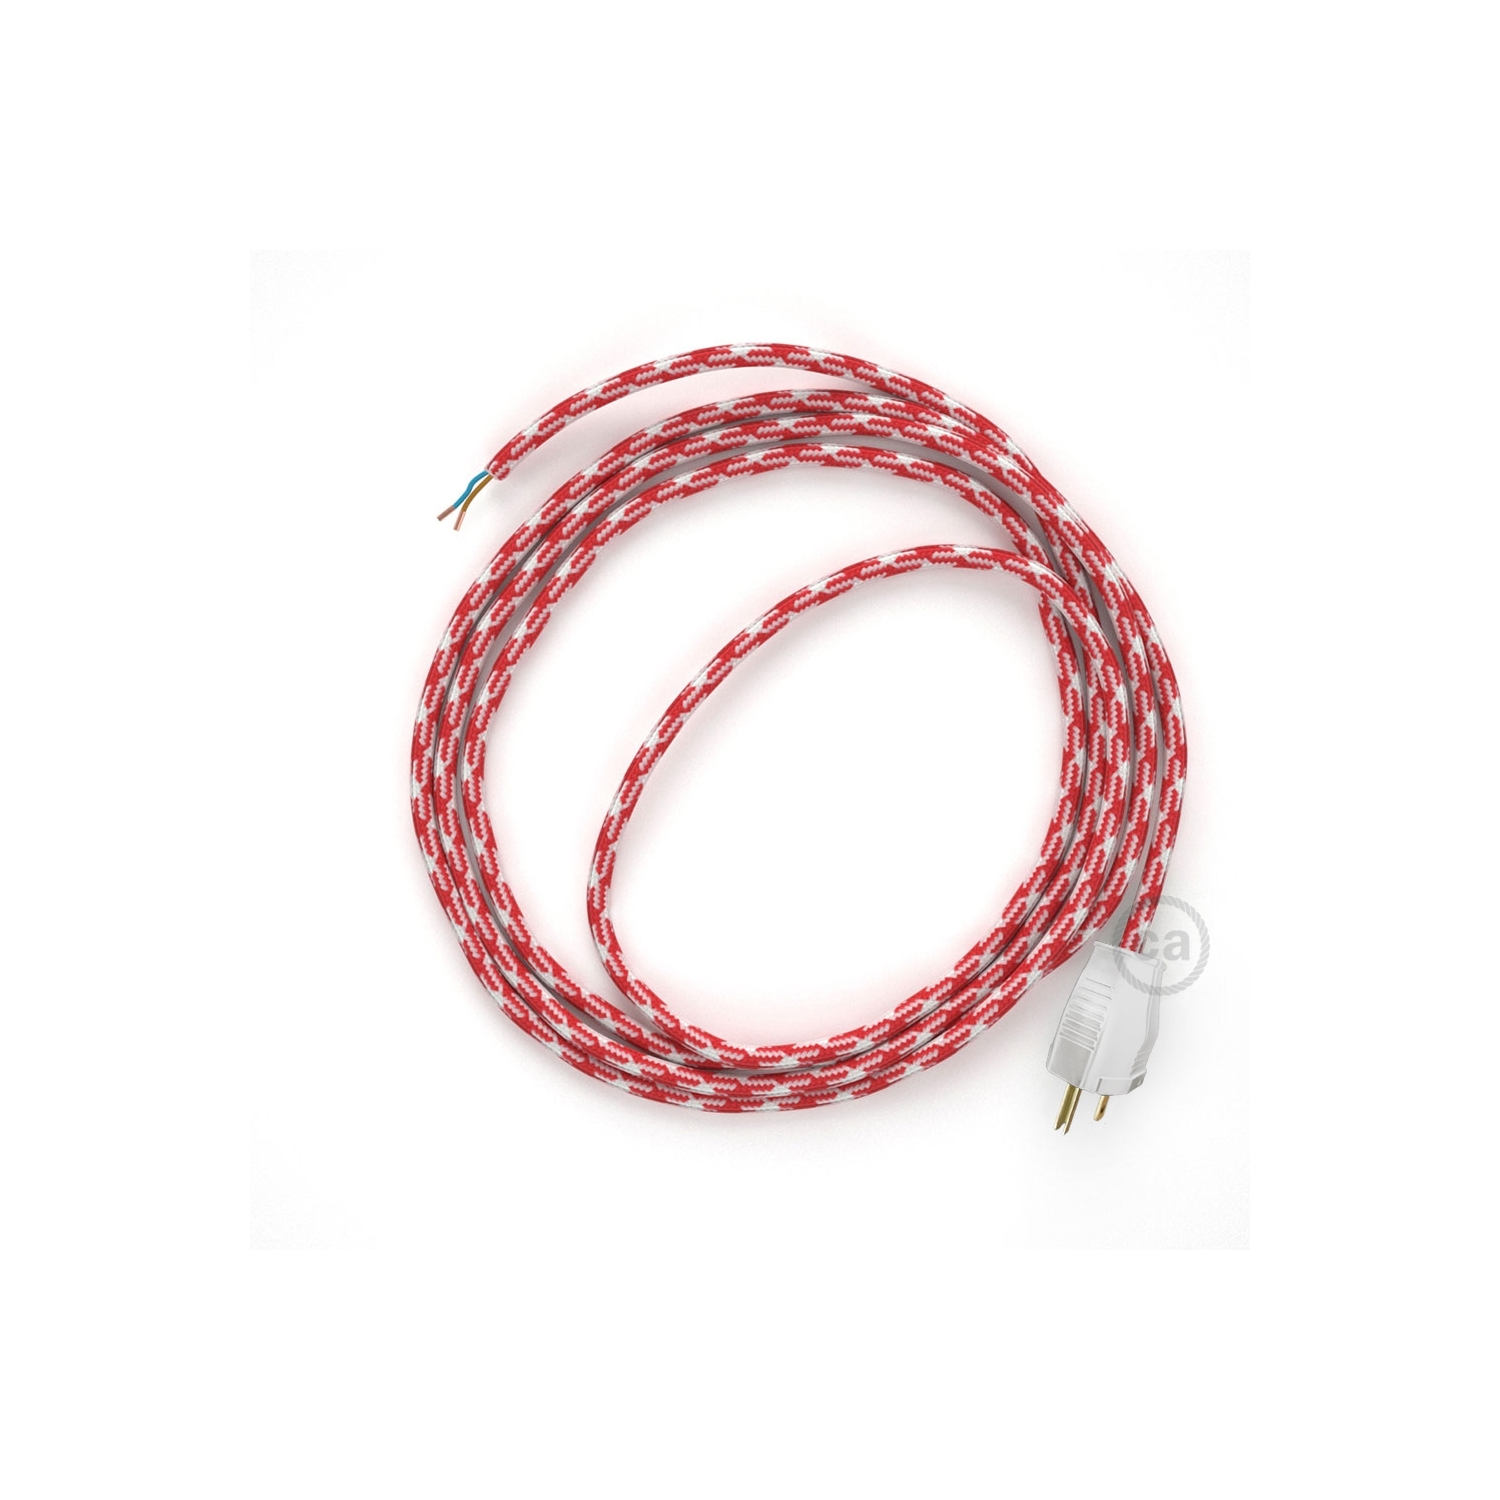 Cord-set - RP09 Red & White Houndstooth Covered Round Cable